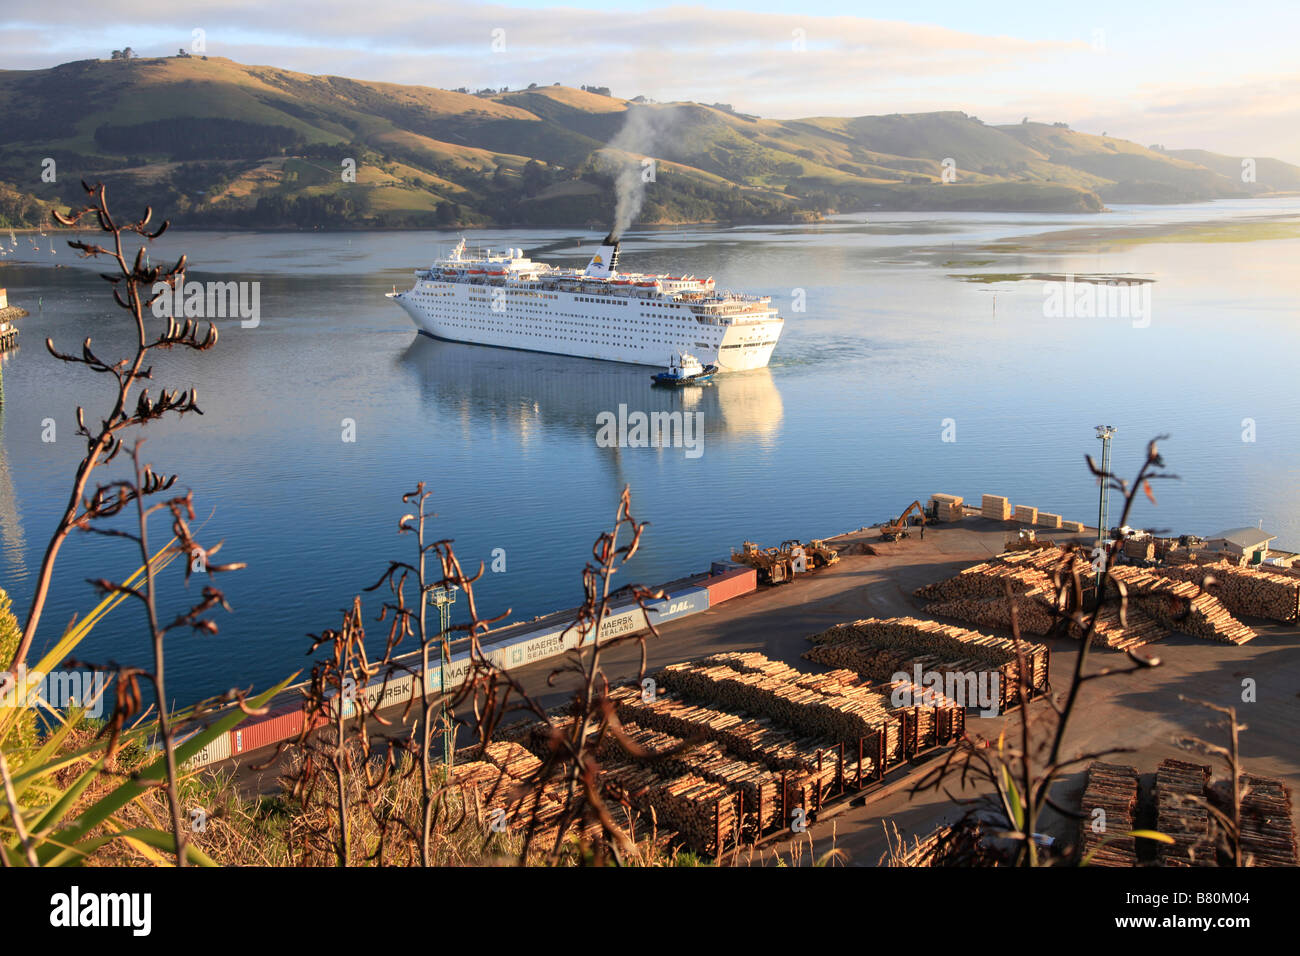 Early morning arrival of Pacific Sun cruise ship with tug boat,Port Chalmers, Otago Harbour, Dunedin, South Island, New Zealand Stock Photo